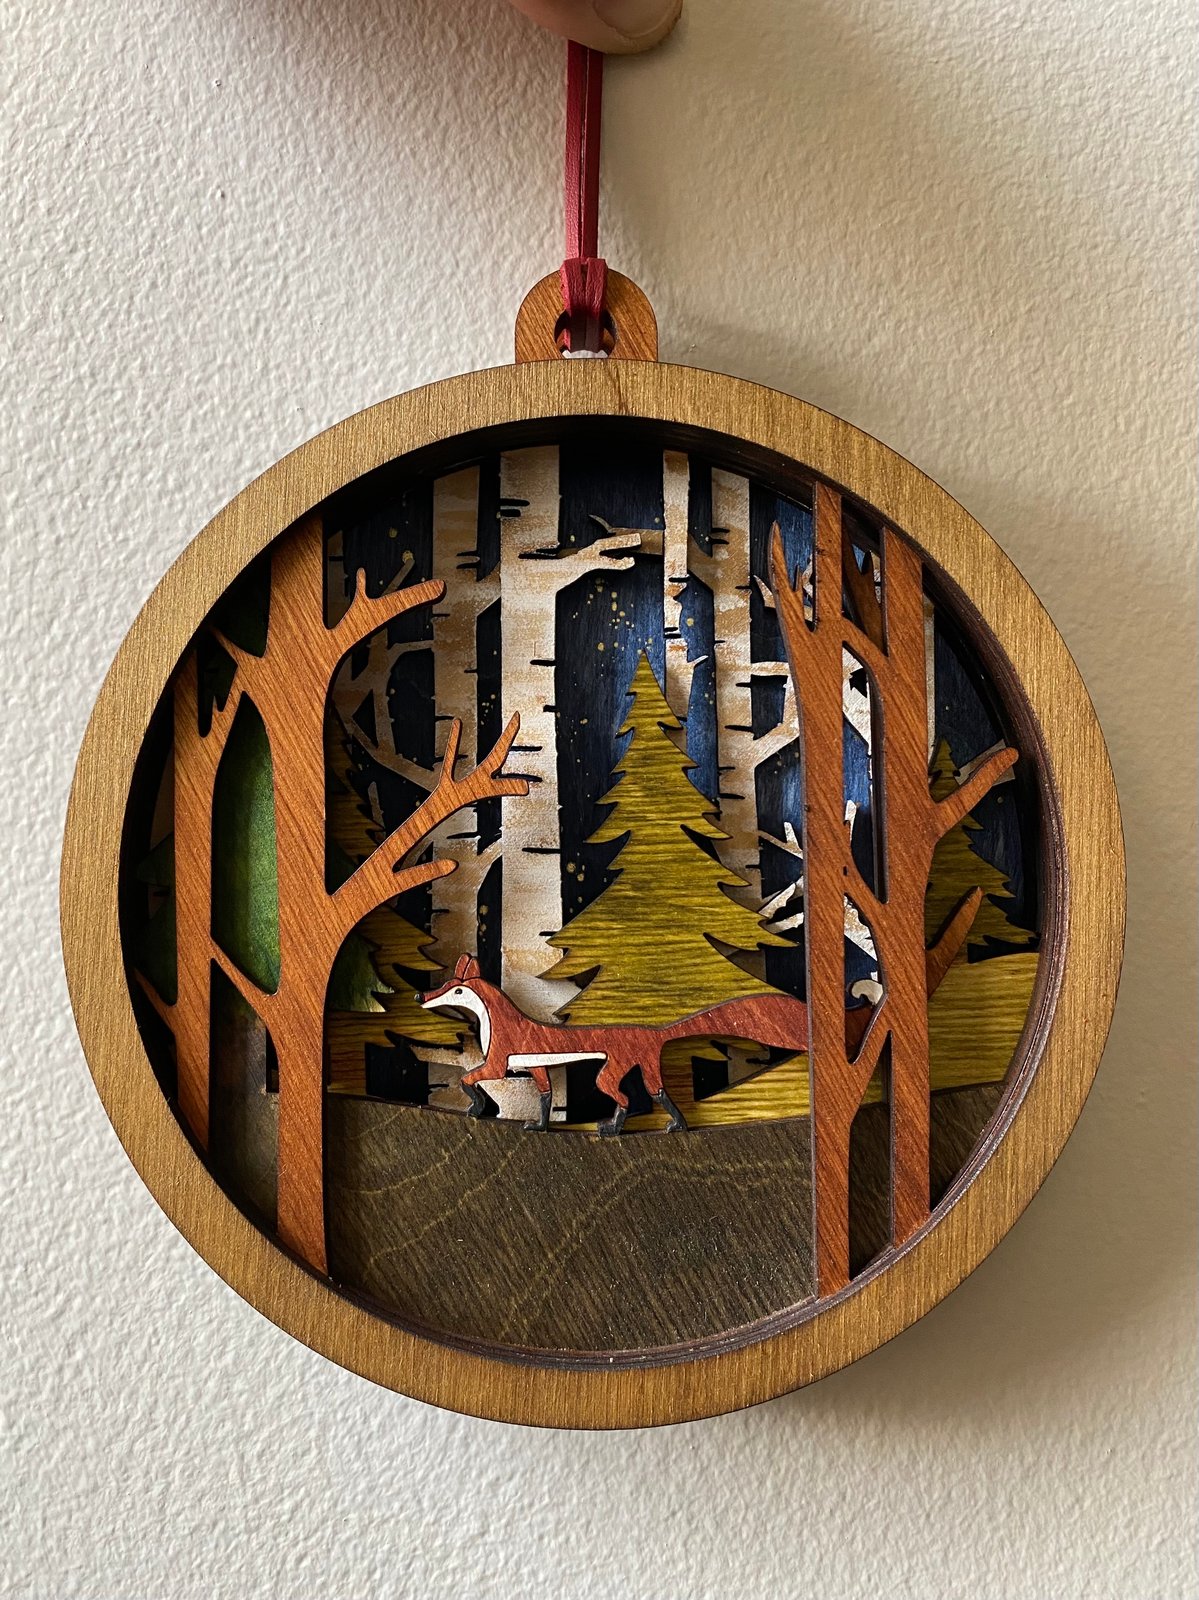 Wolf Mountain - Layered 3-D Wooden Ornament Collection by Acorn & Fox